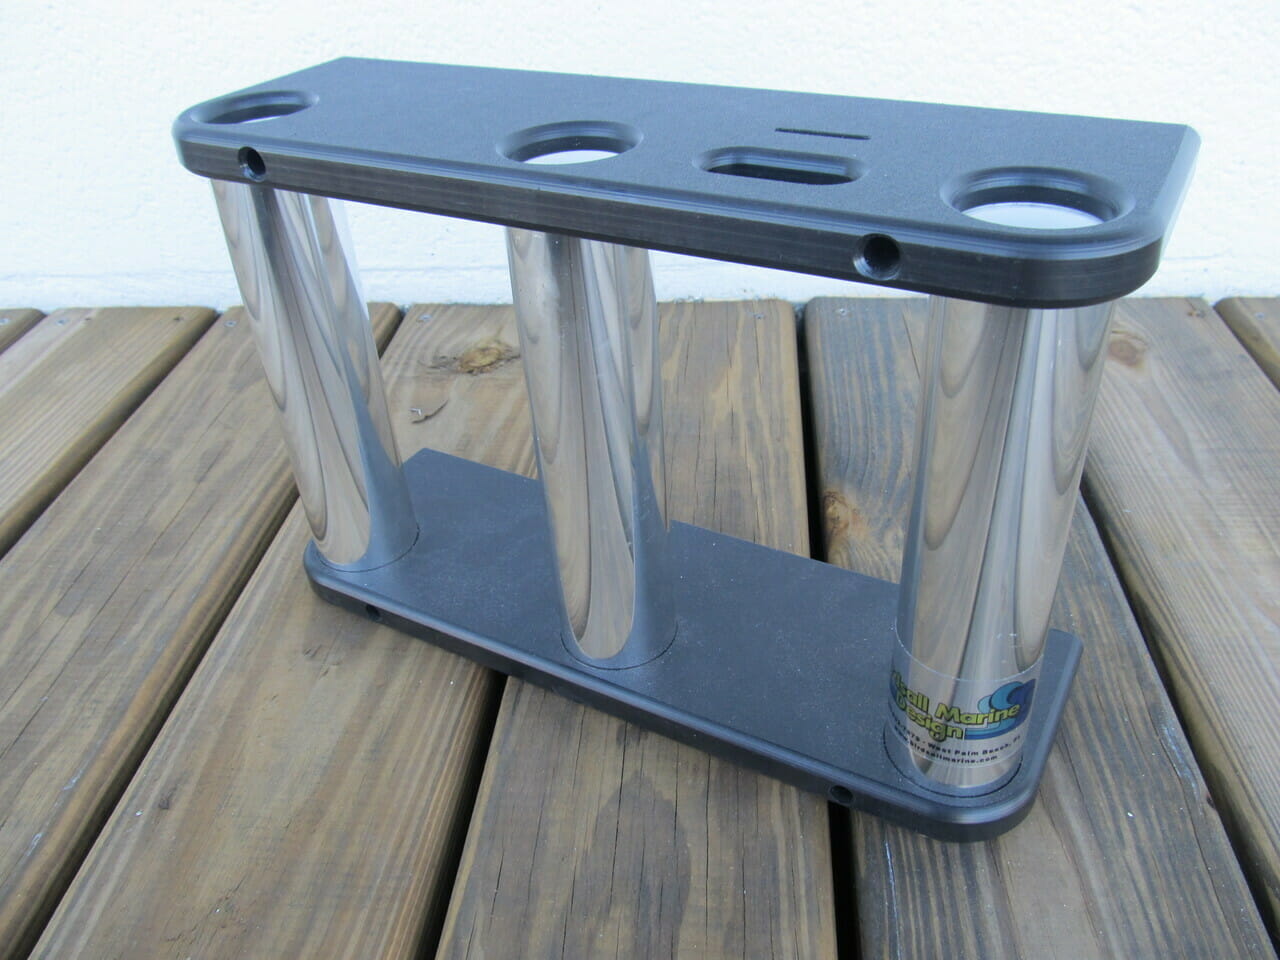 Console Rod Holders with "Black" Starboard.